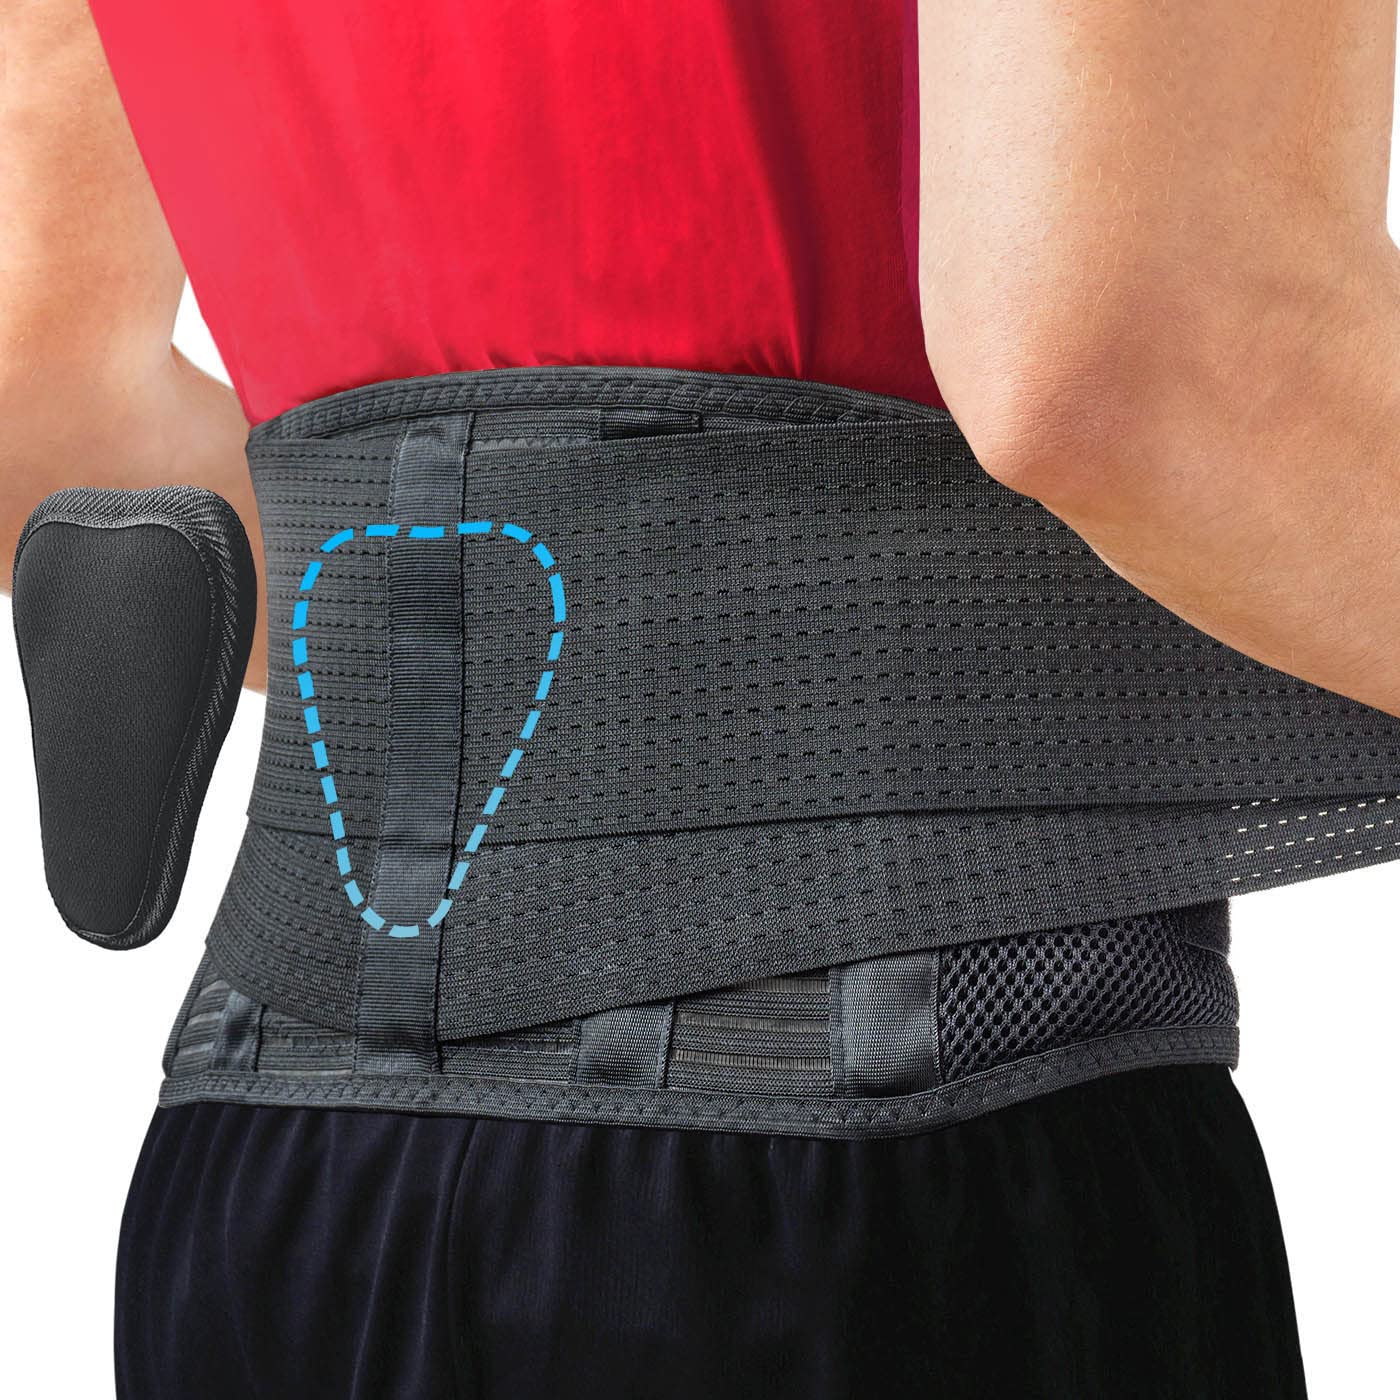 Best Lumbar Belt for Herniated Disc - Top Support for Back Pain Relief